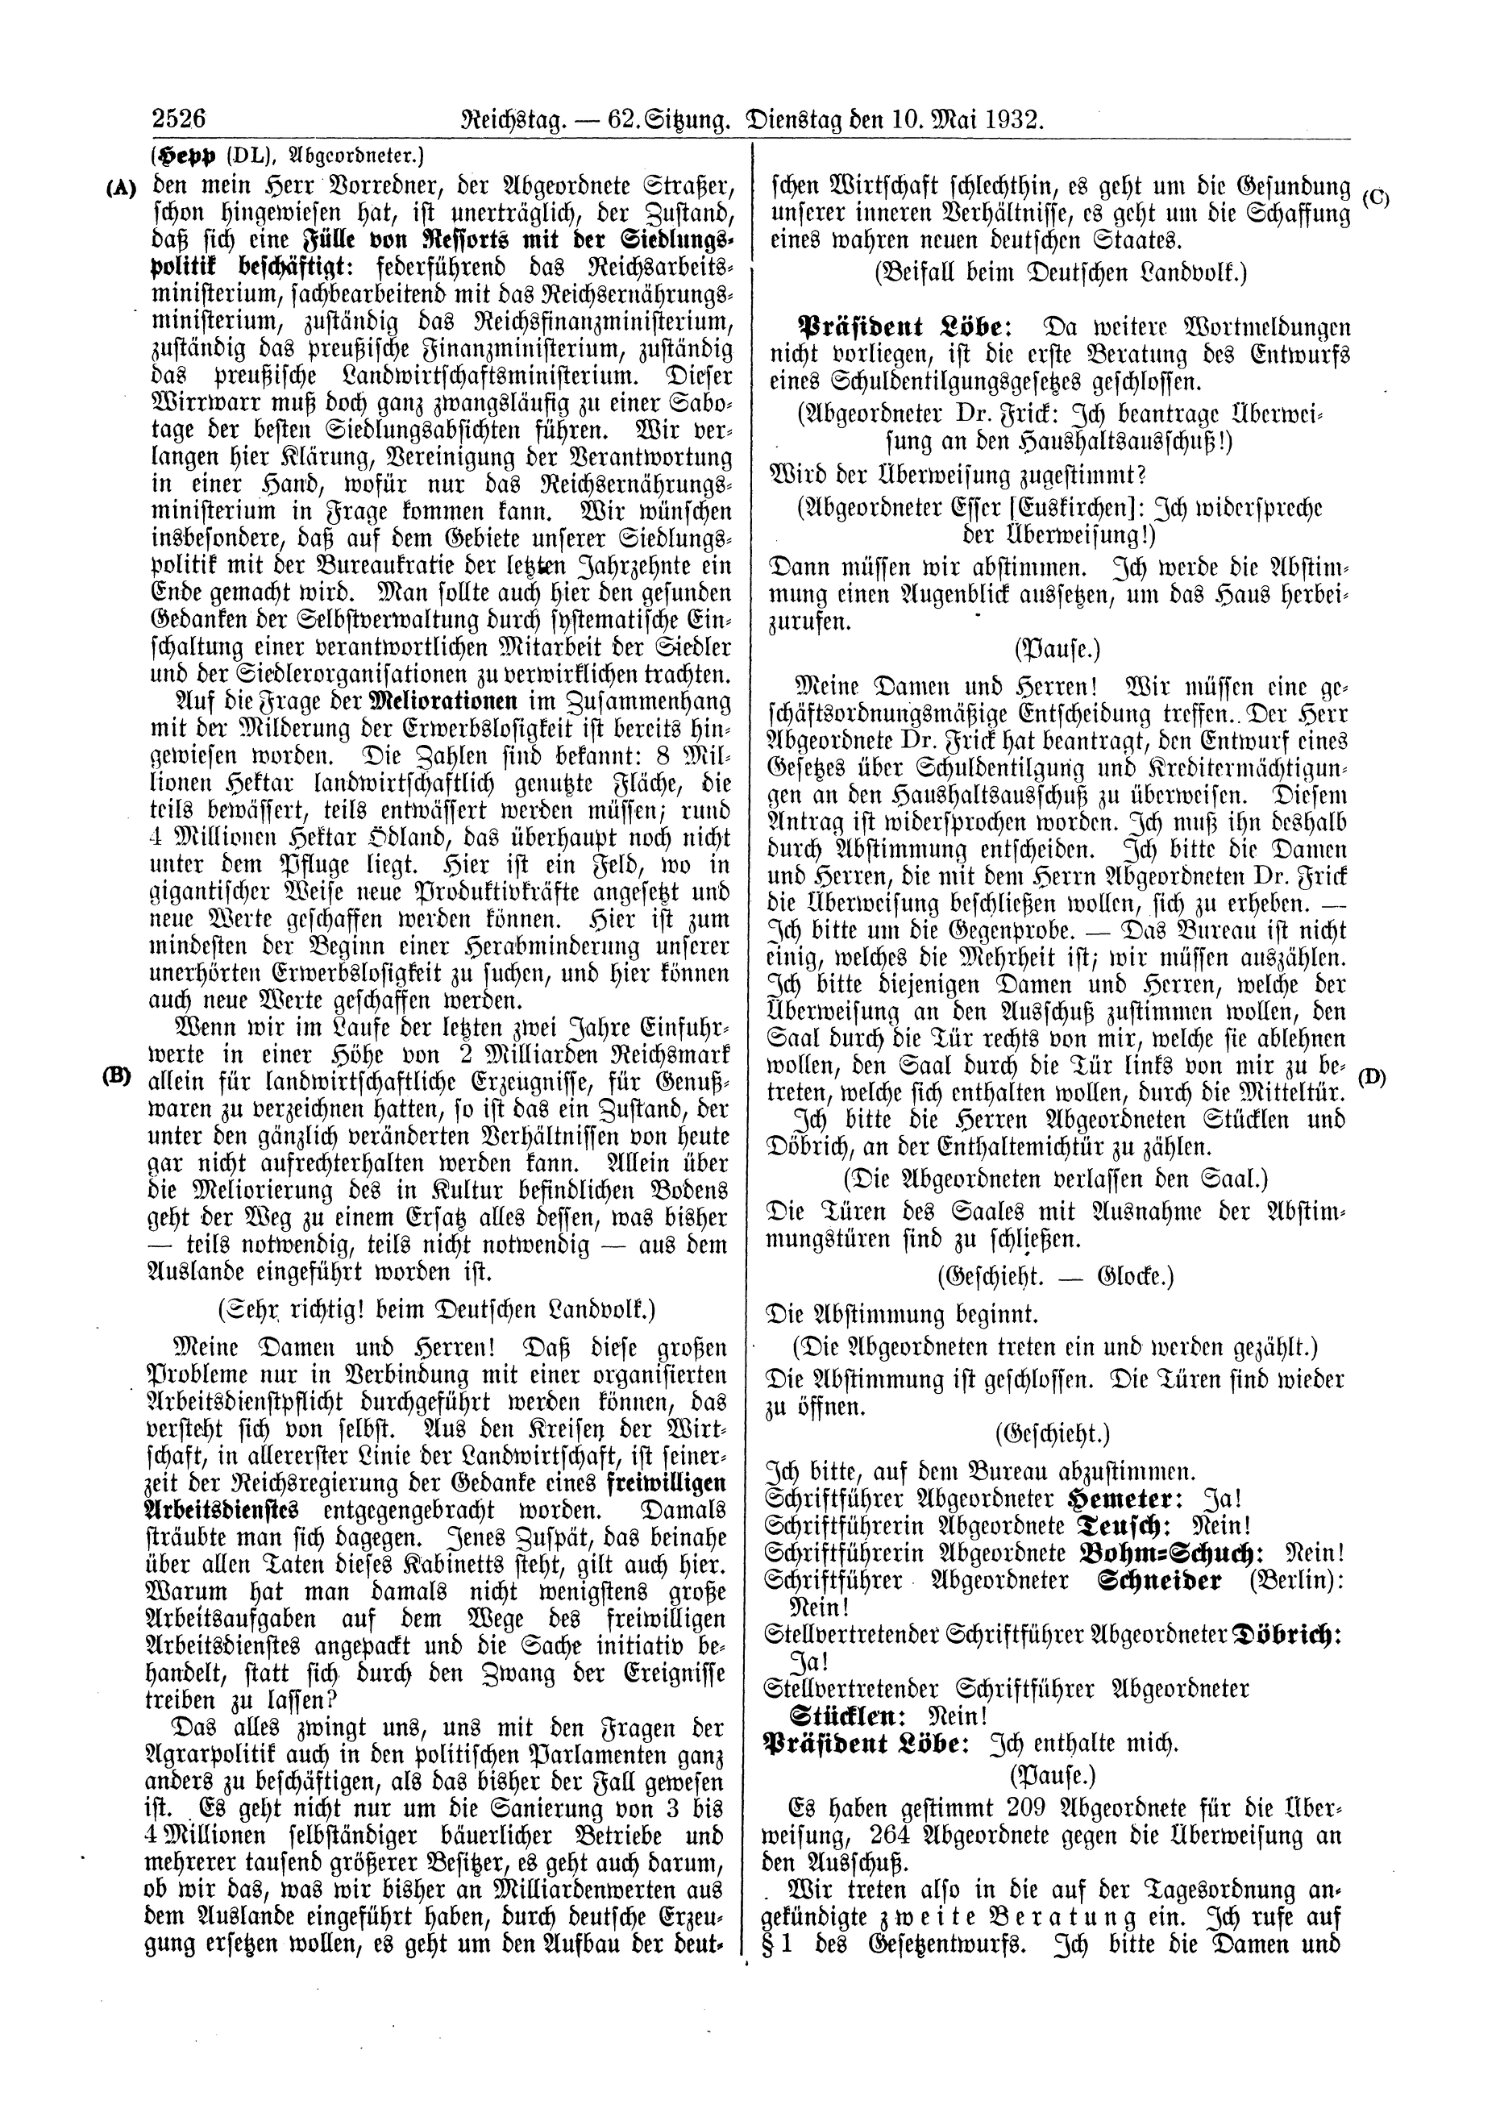 Scan of page 2526